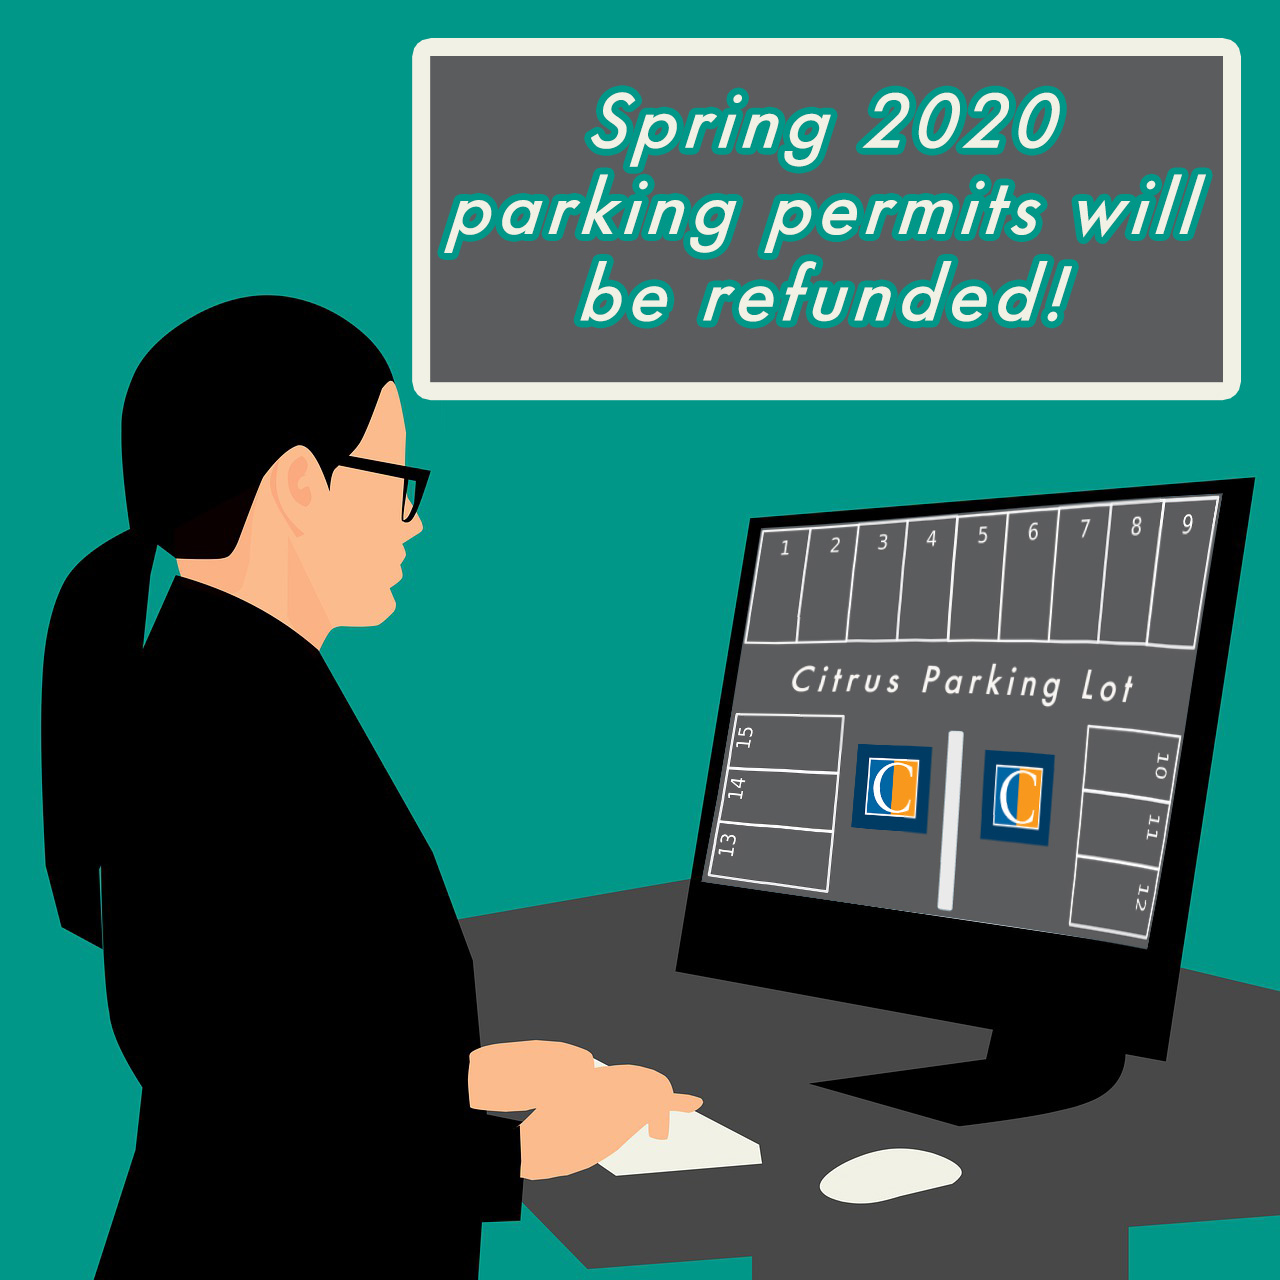 Parking permit refund available soon at Citrus College during COVID-19 pandemic